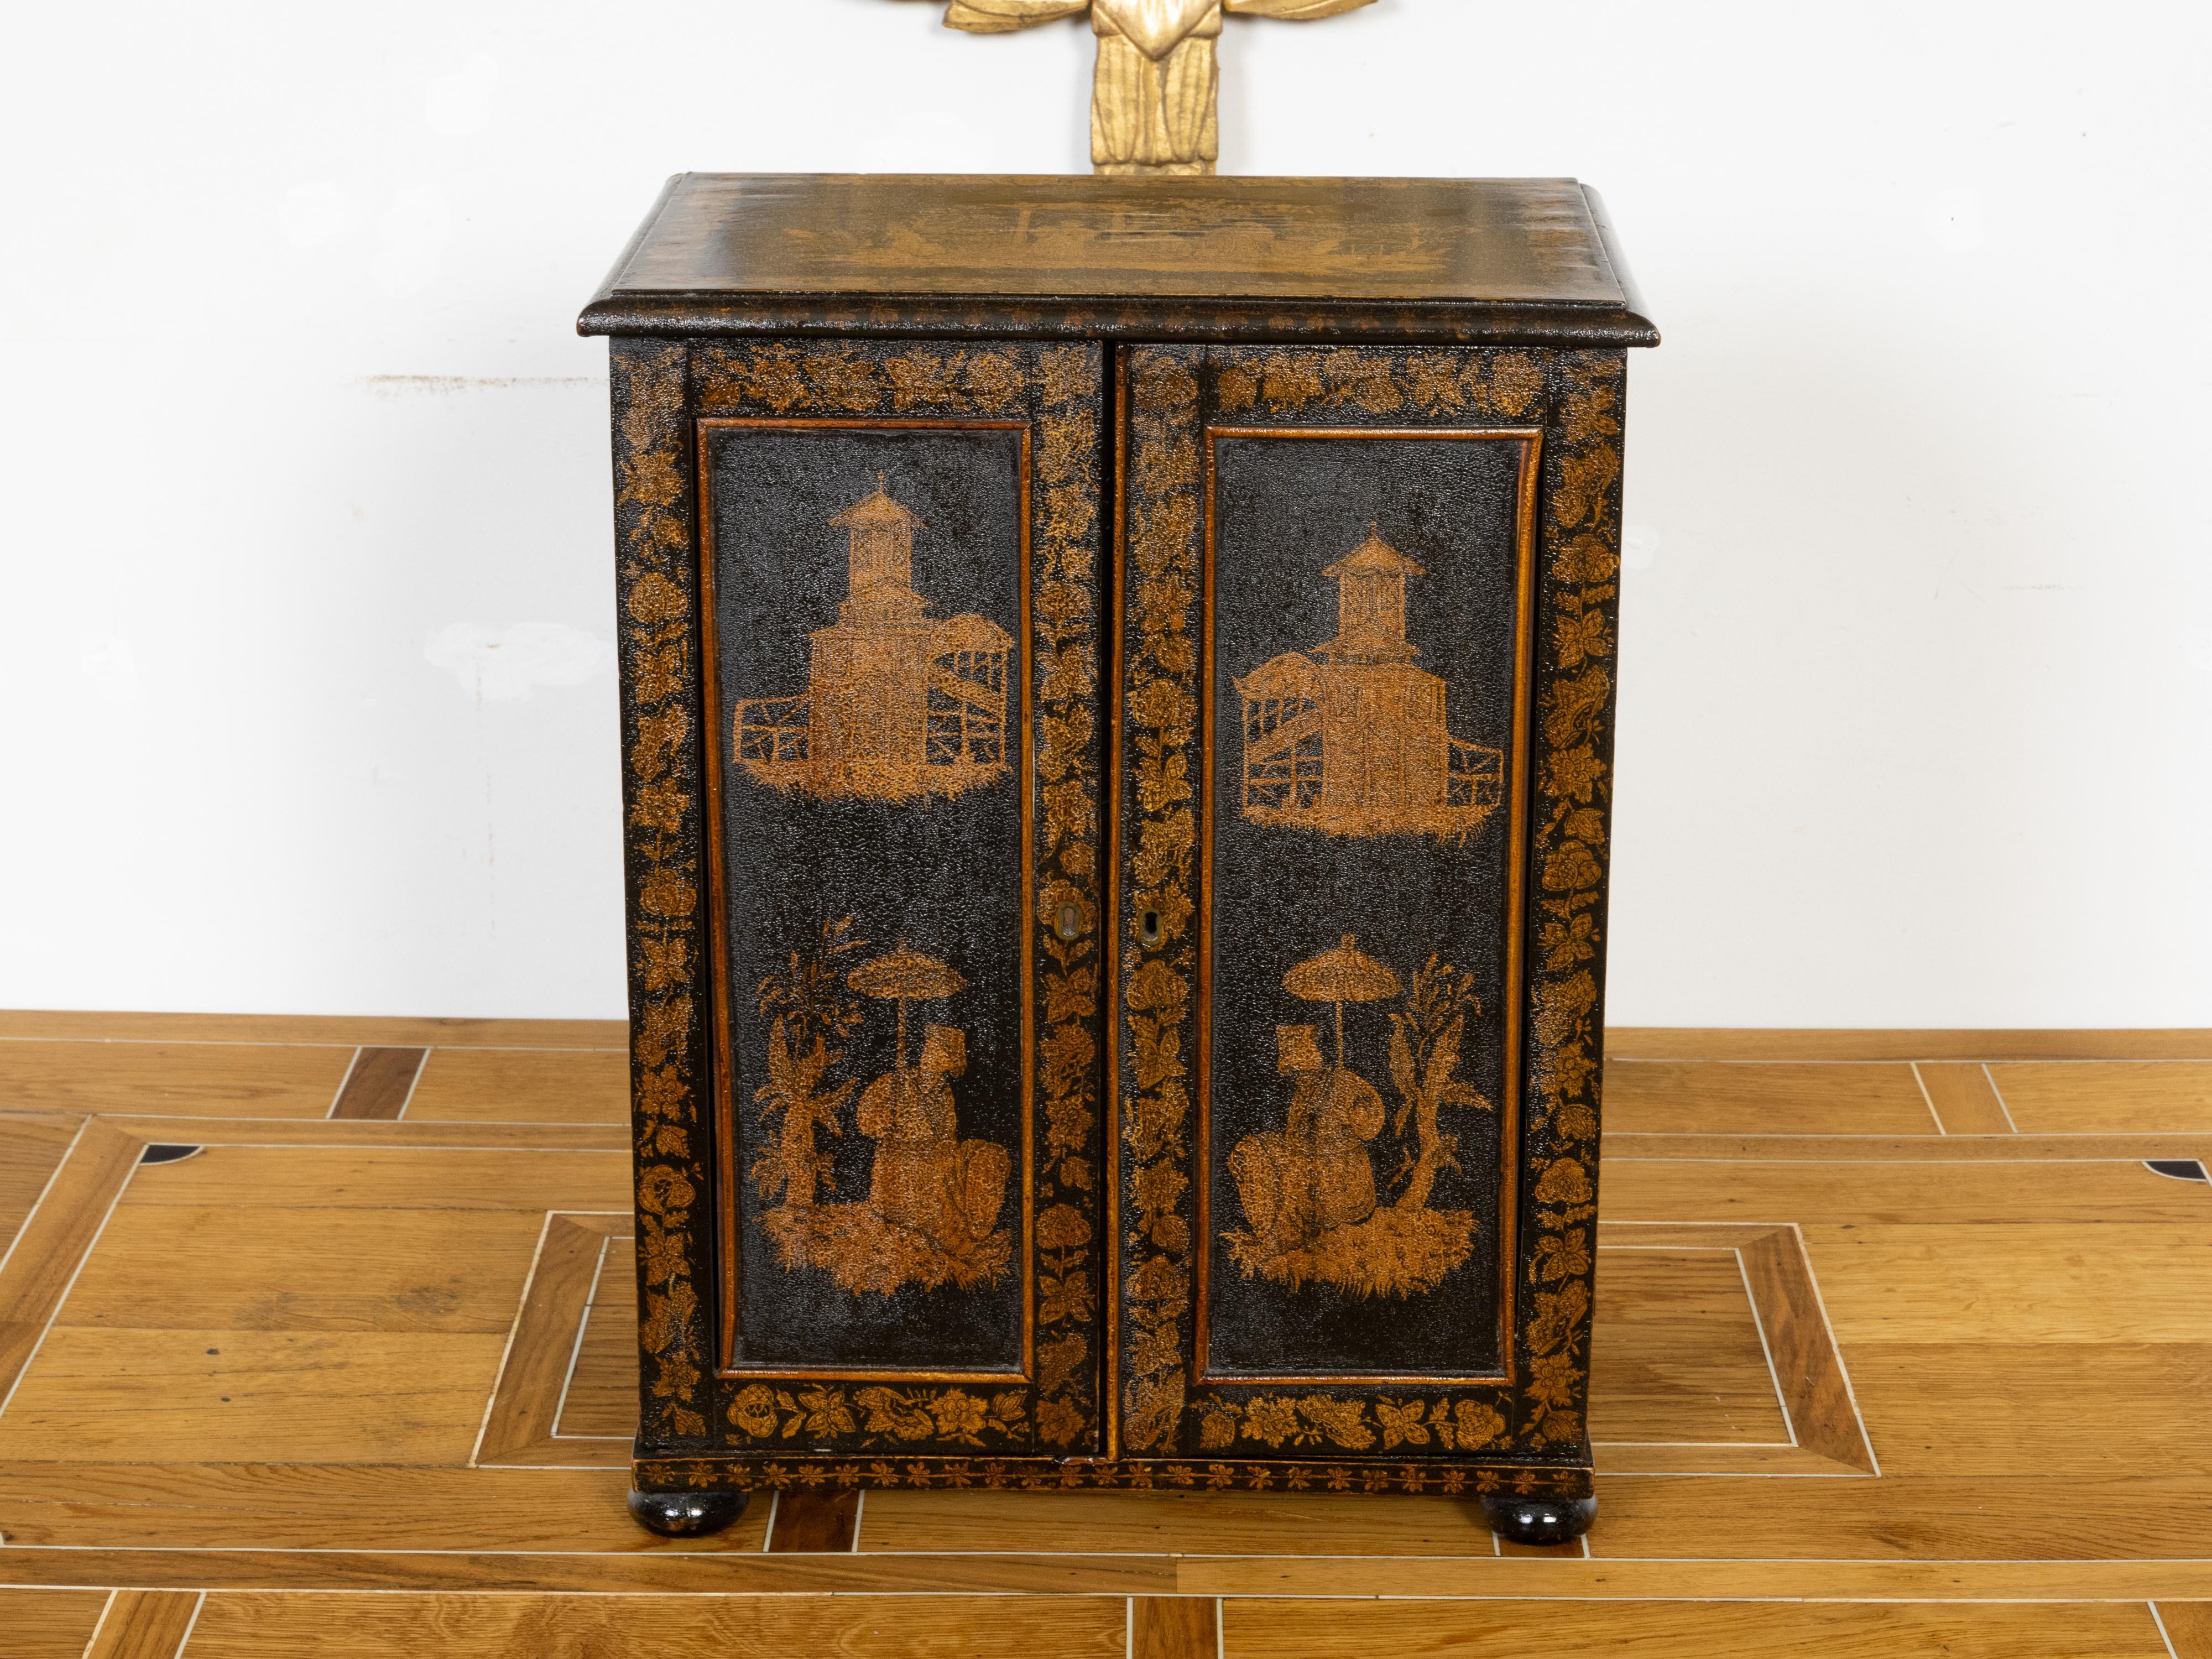 A small English black and gold cabinet from the 19th century, with chinoiserie décor, two doors and seven inner graduated drawers. Created in England during the reign of Queen Victoria in the 19th century, this small table top cabinet features a